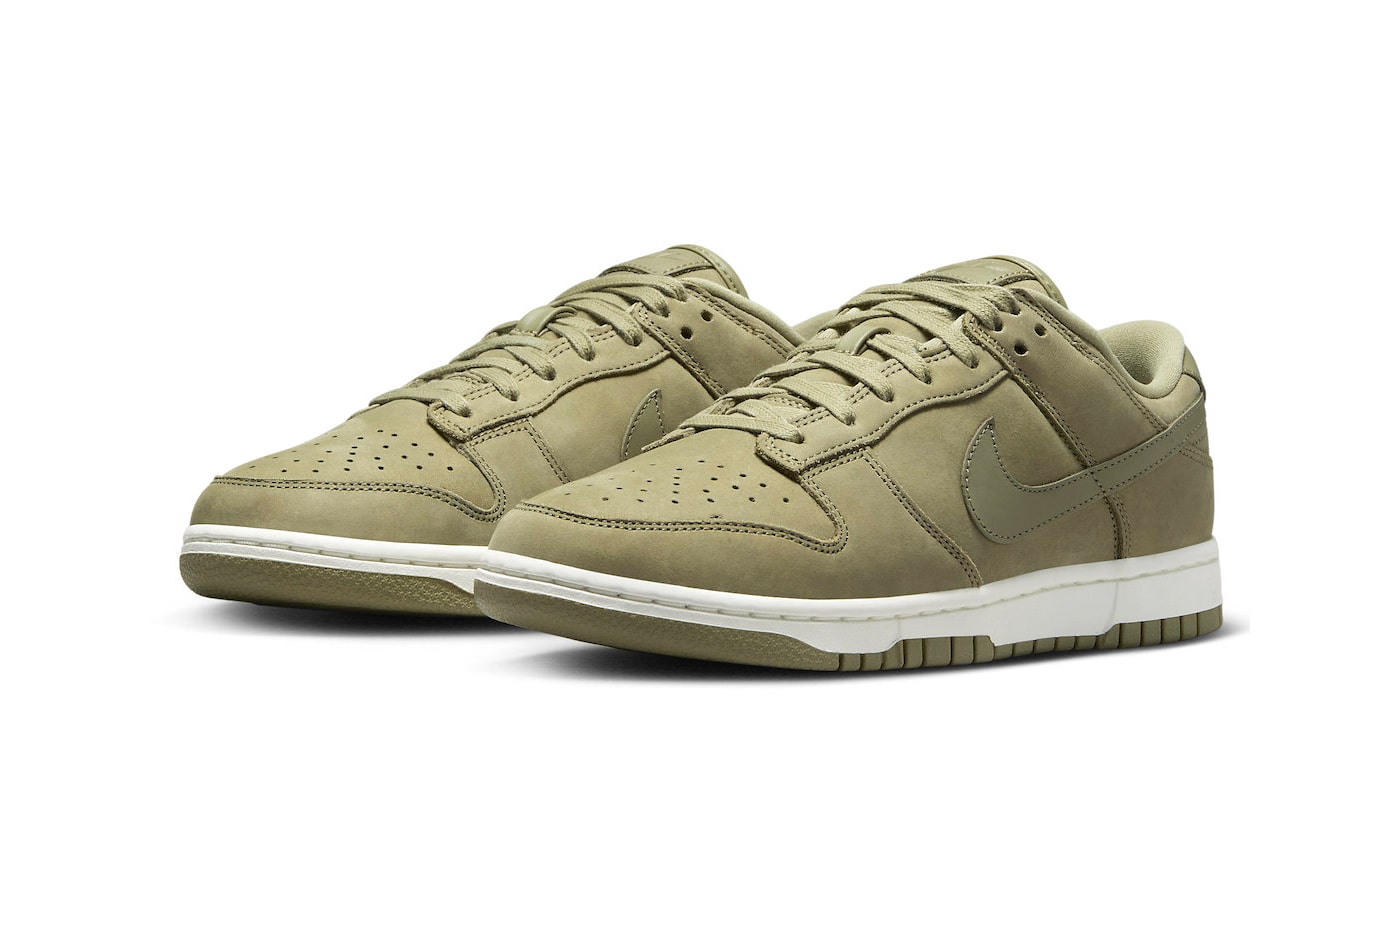 Official Images of the Nike Dunk Low Premium "Neutral Olive" DV7415-200 Release Info Neutral Olive/Neutral Olive-Sail swoosh leather low top shoes sneakers